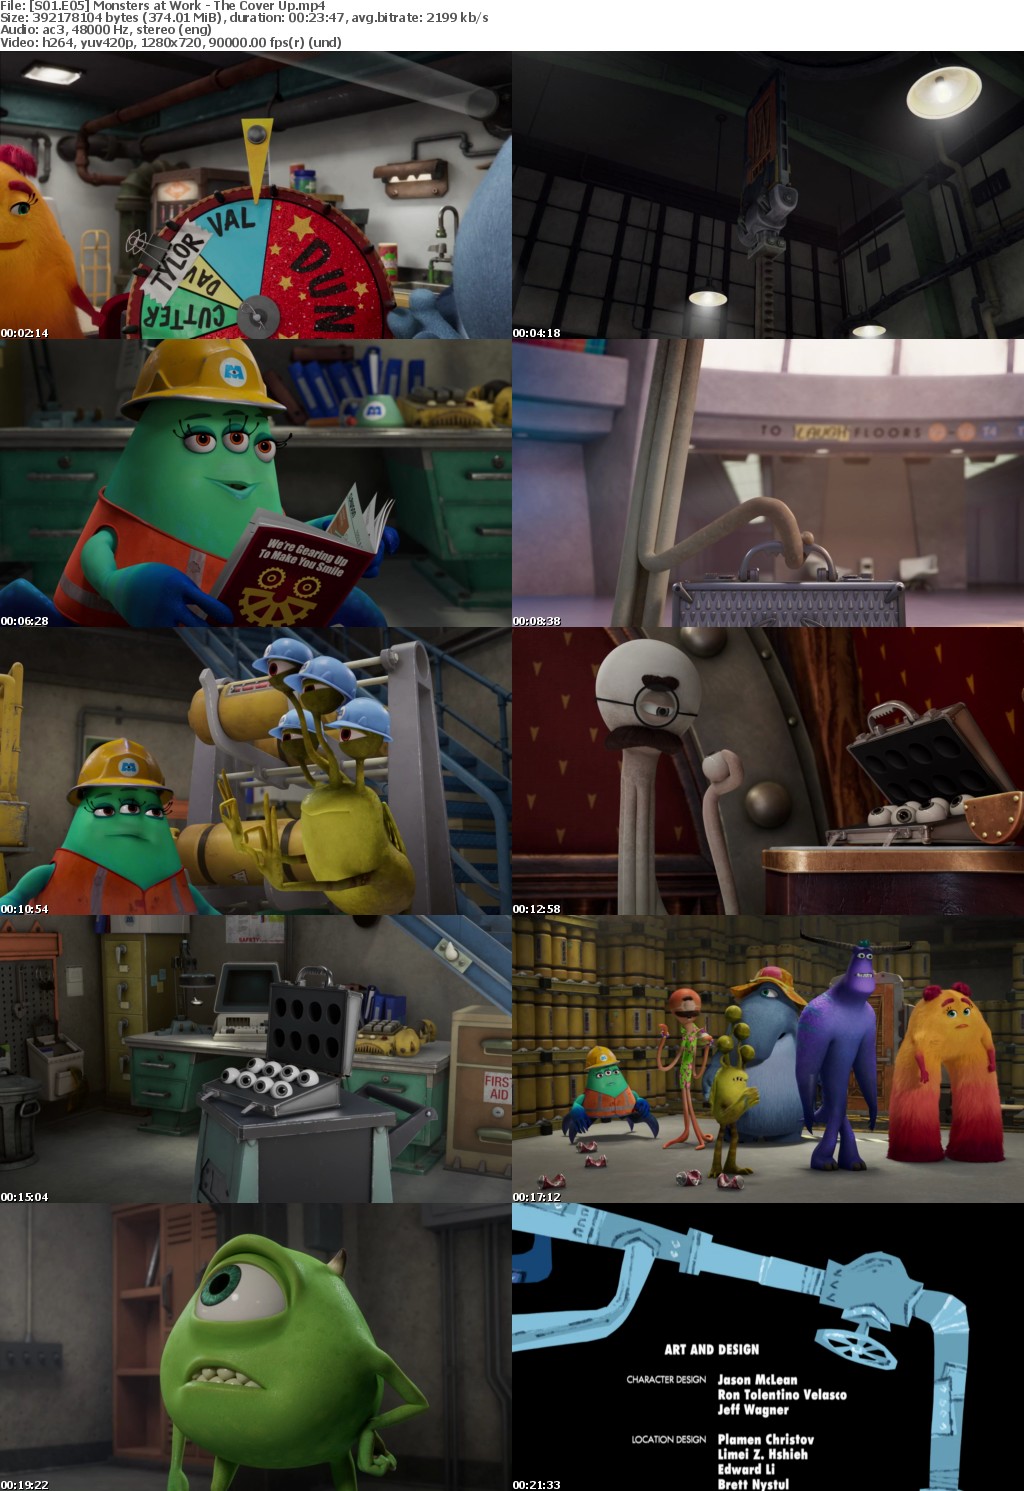 Monsters at Work S1 E5 The Cover Up MP4 720p H264 WEBRip EzzRips